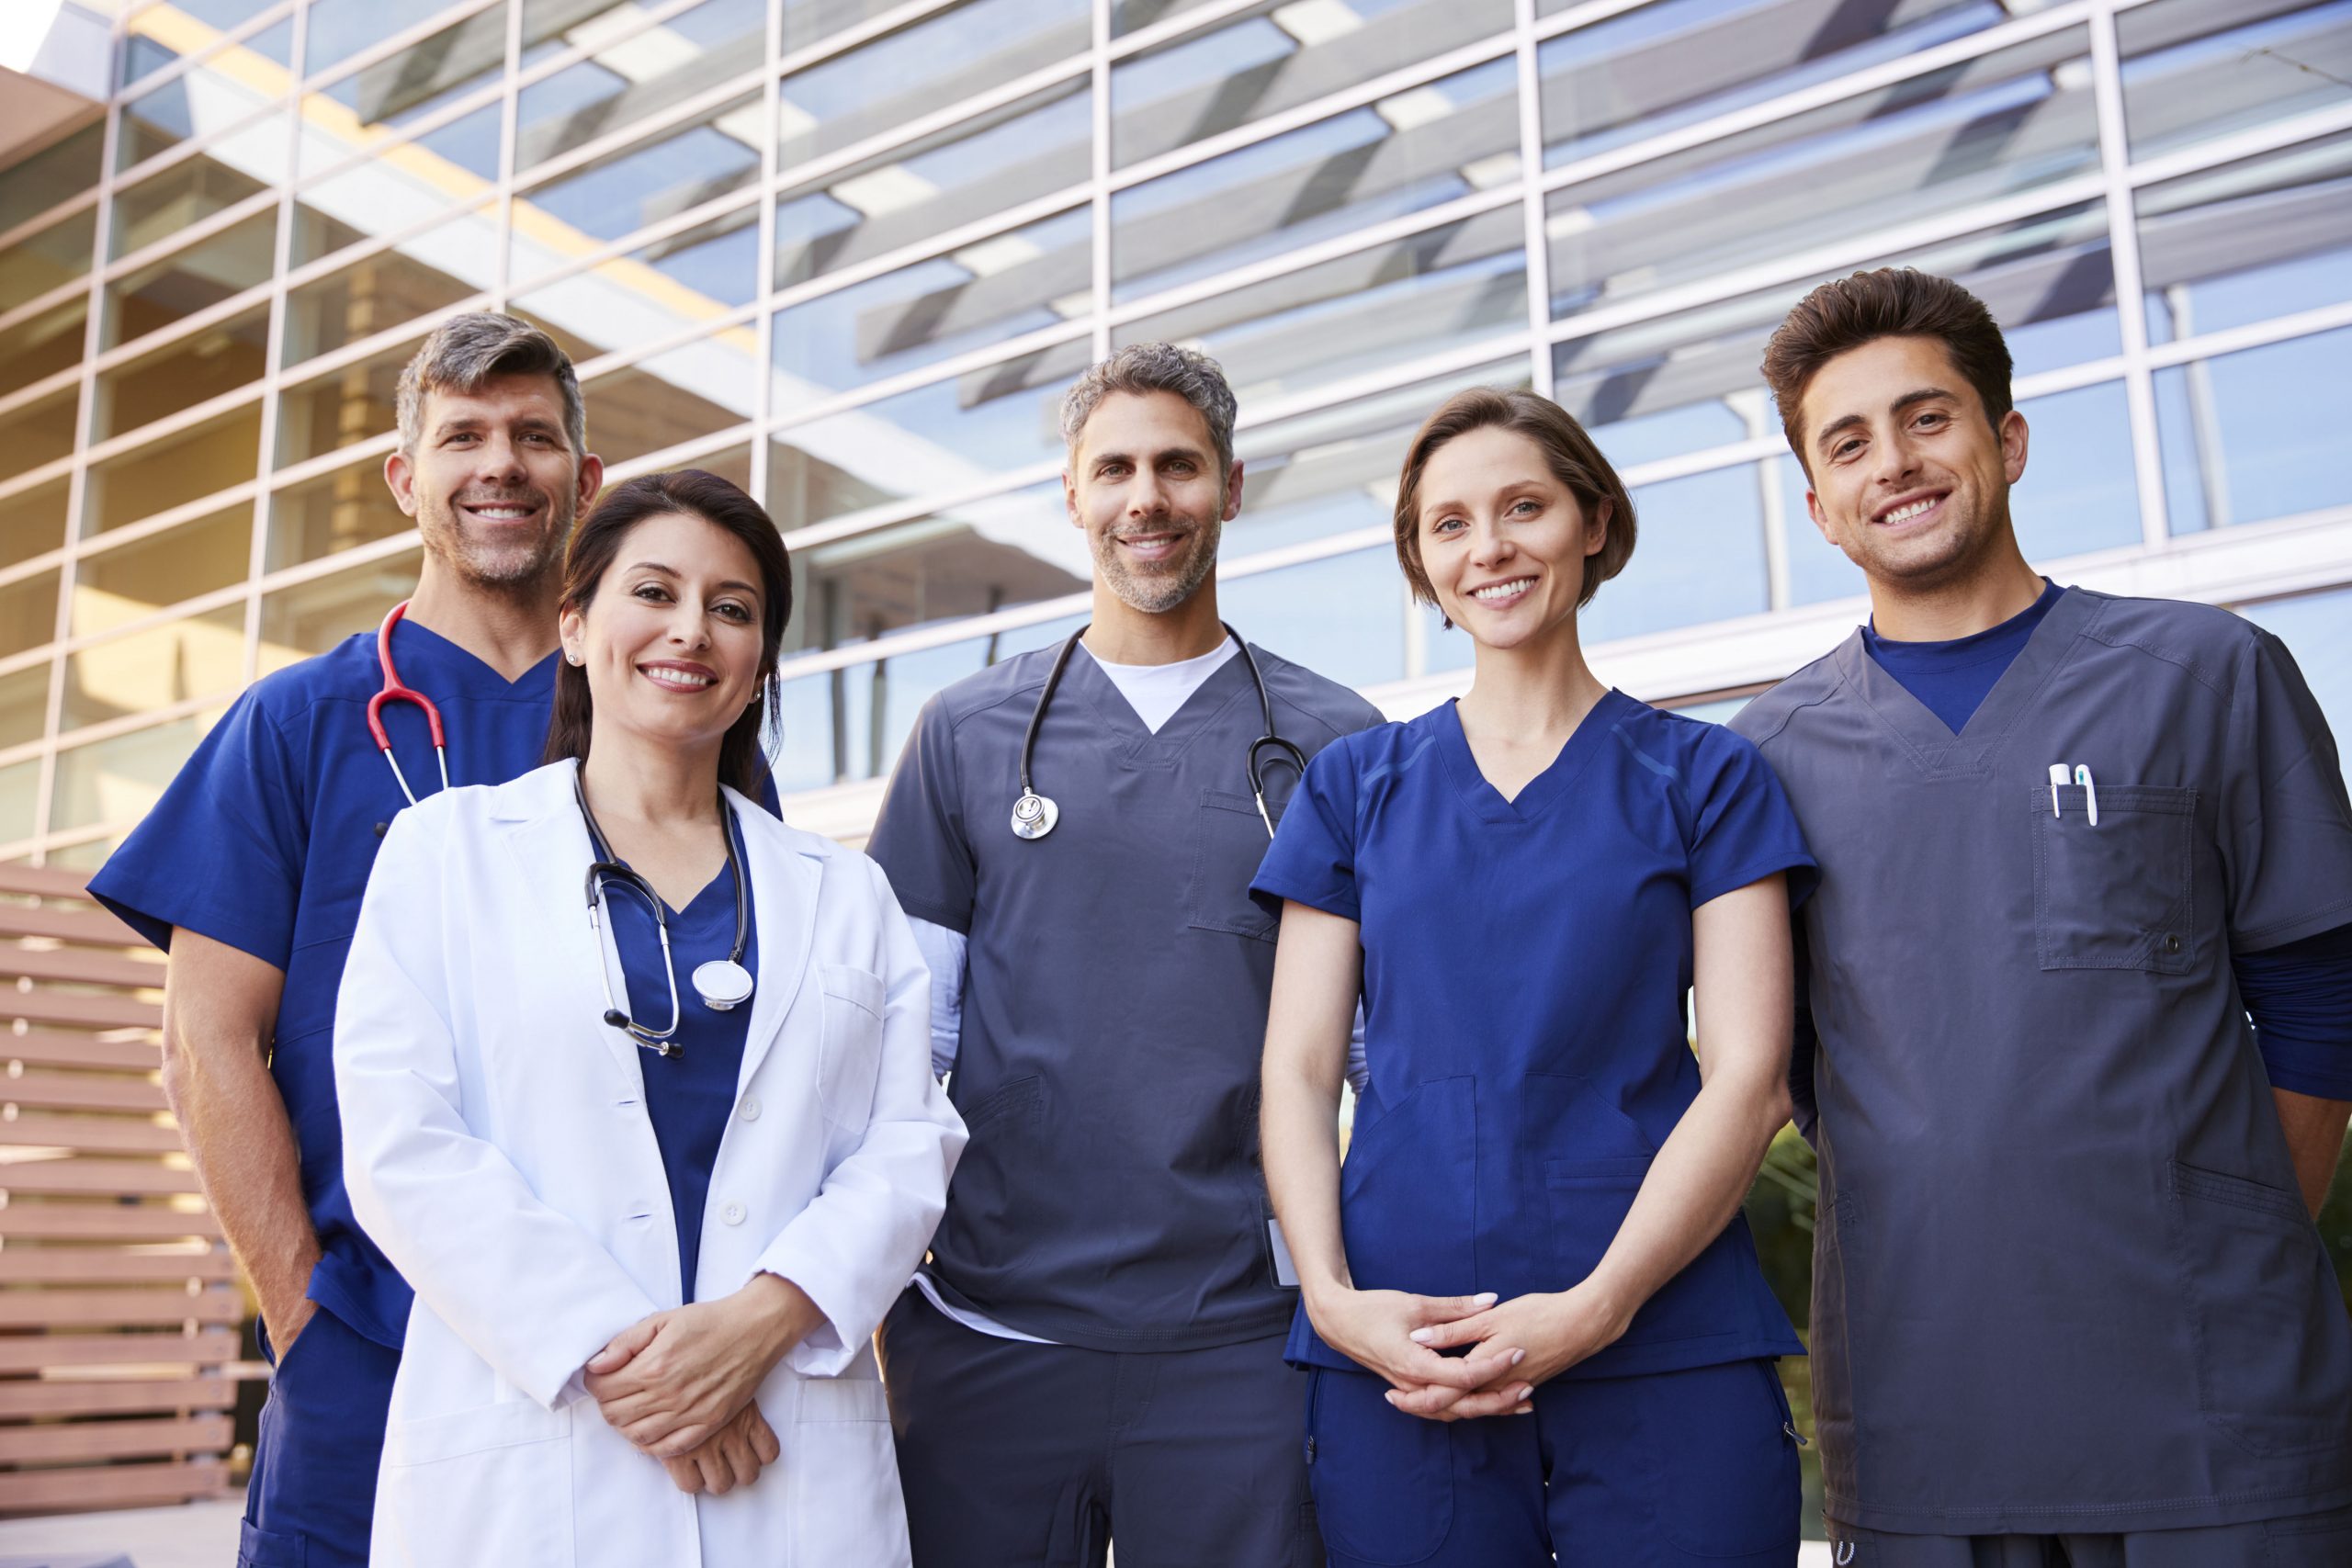 Five healthcare colleagues standing outdoors, group portrait